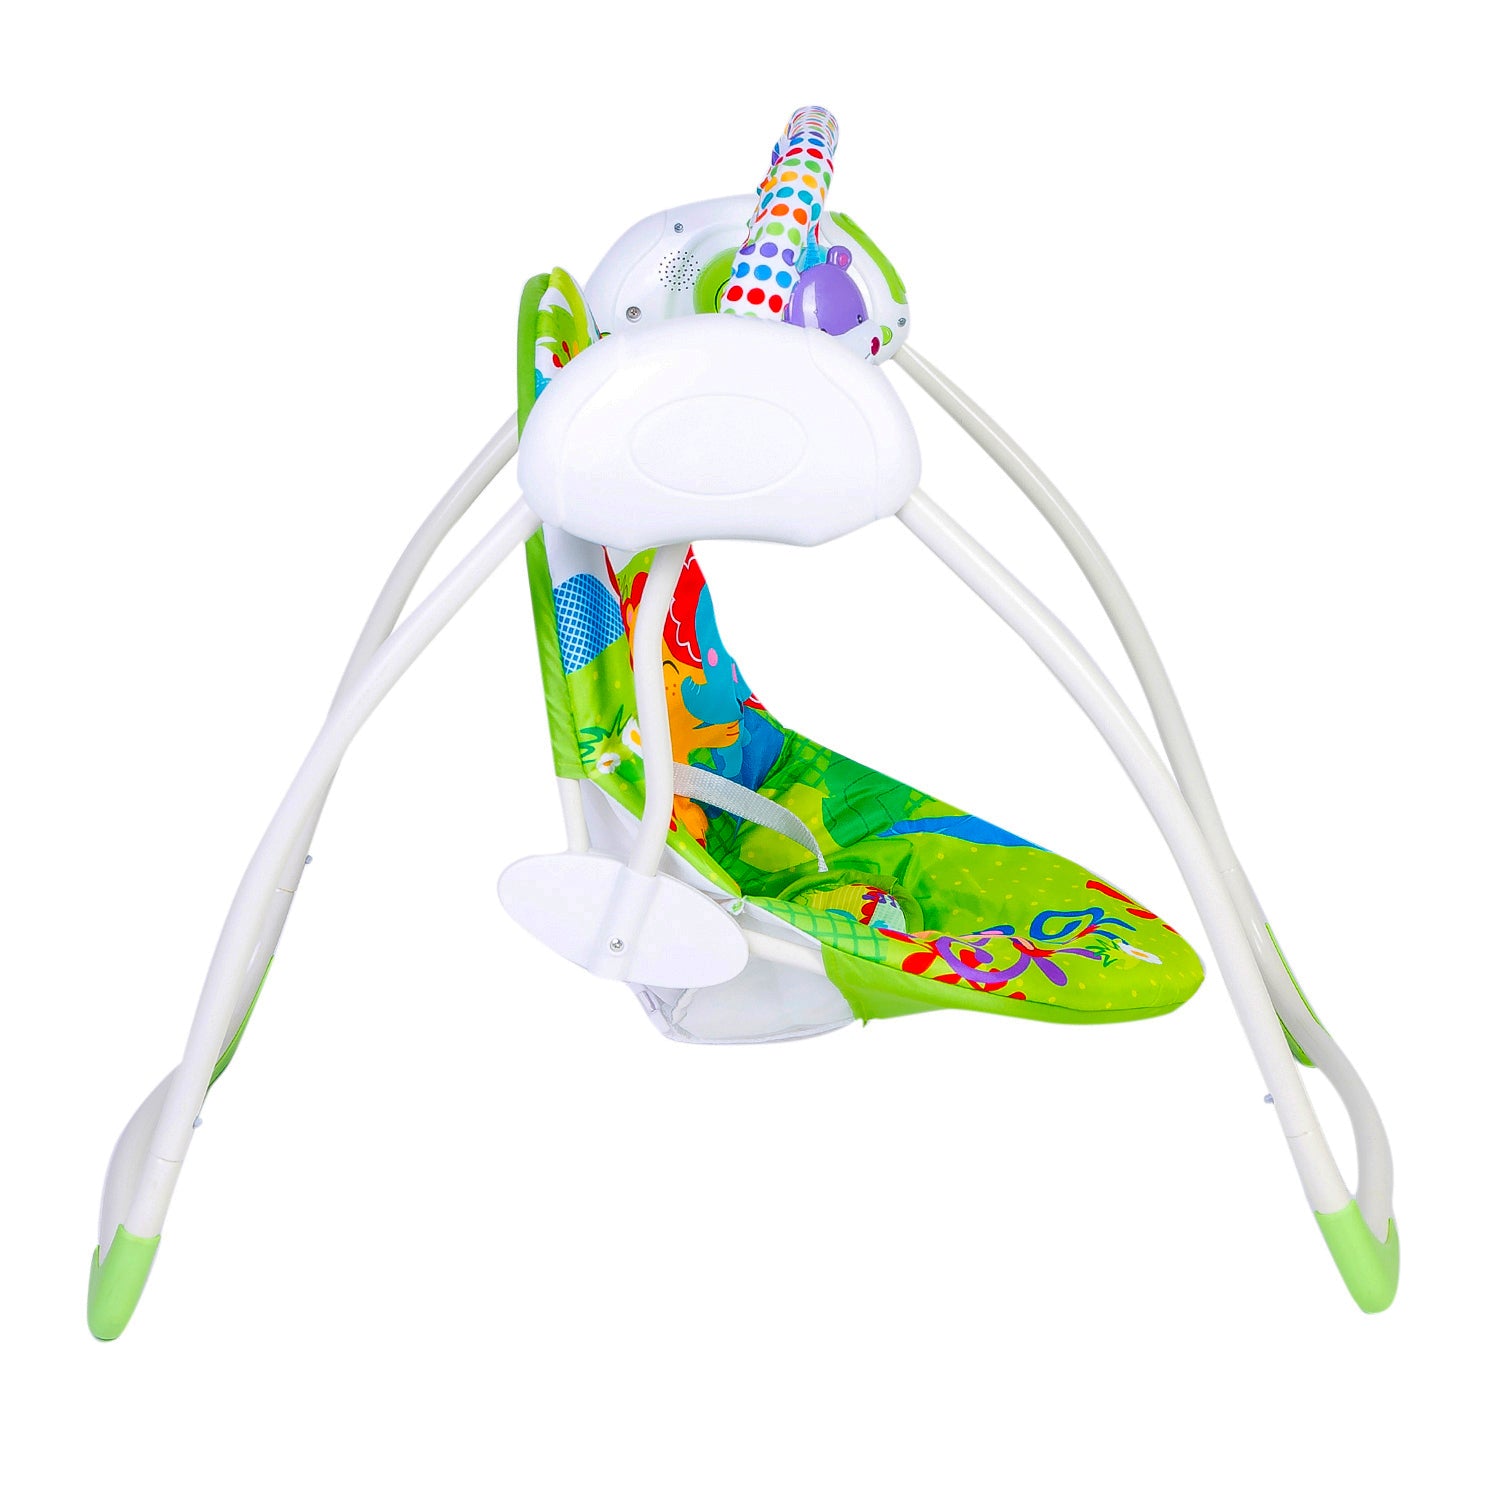 Bright Stars Foldable Musical Comfortable Swing With Animals Green